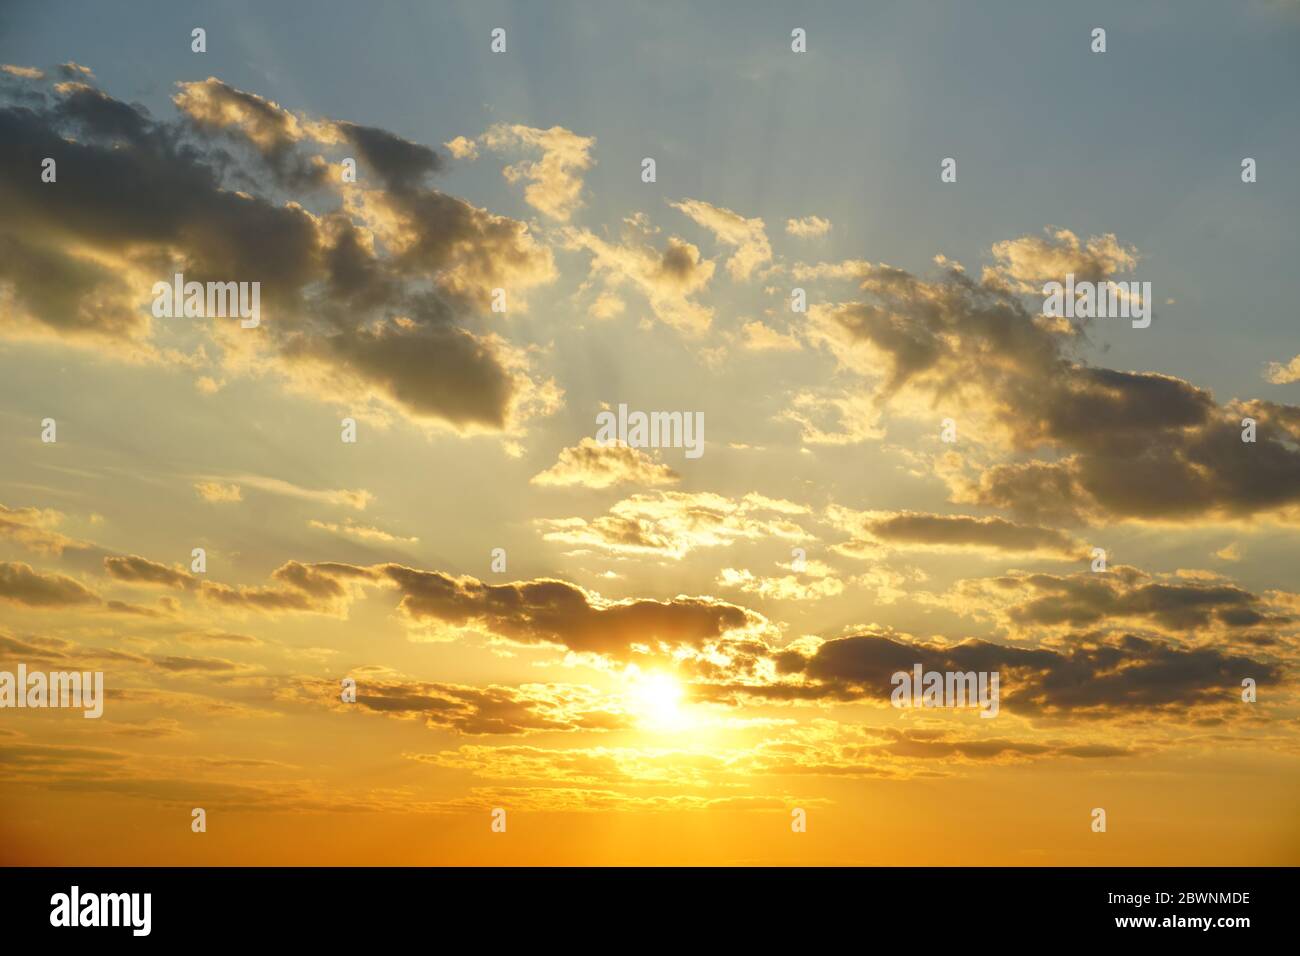 Sunset sky with clouds and sunny beams. Sky sunset background. Stock Photo